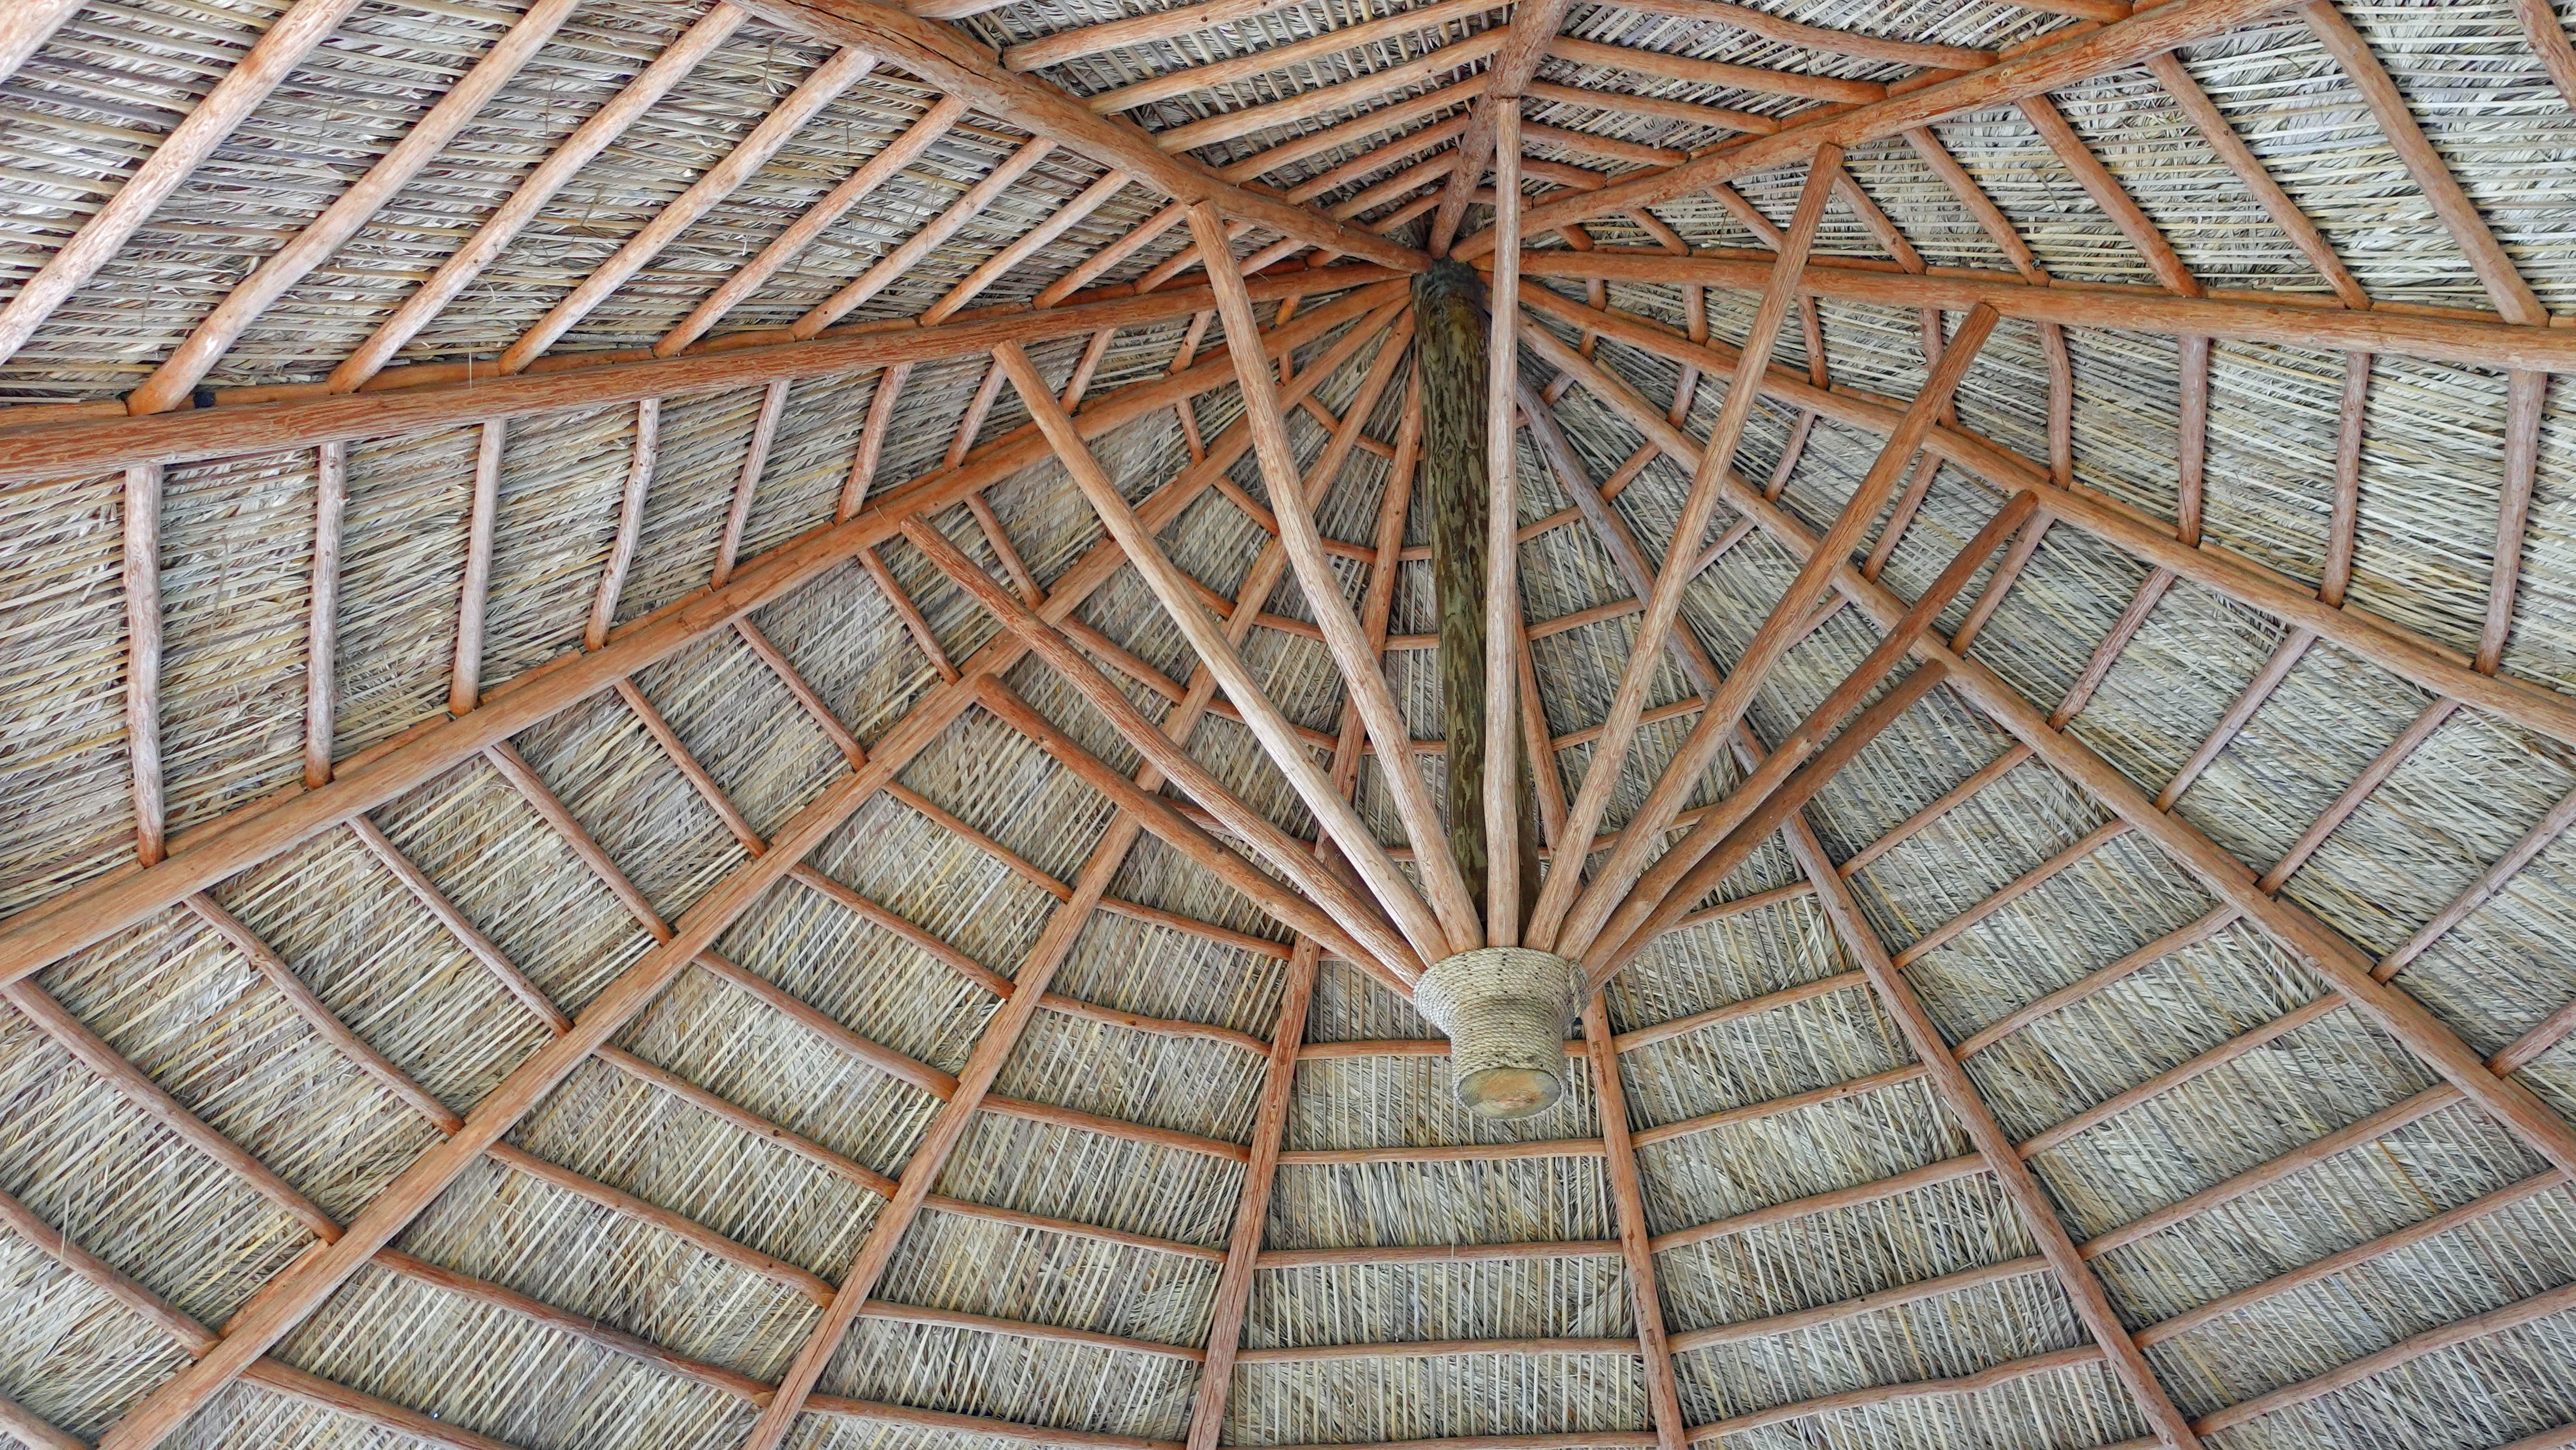 the shady underside of the thatched roof on the main level of the first level of the water park of westgate town center's shipwreck island water park